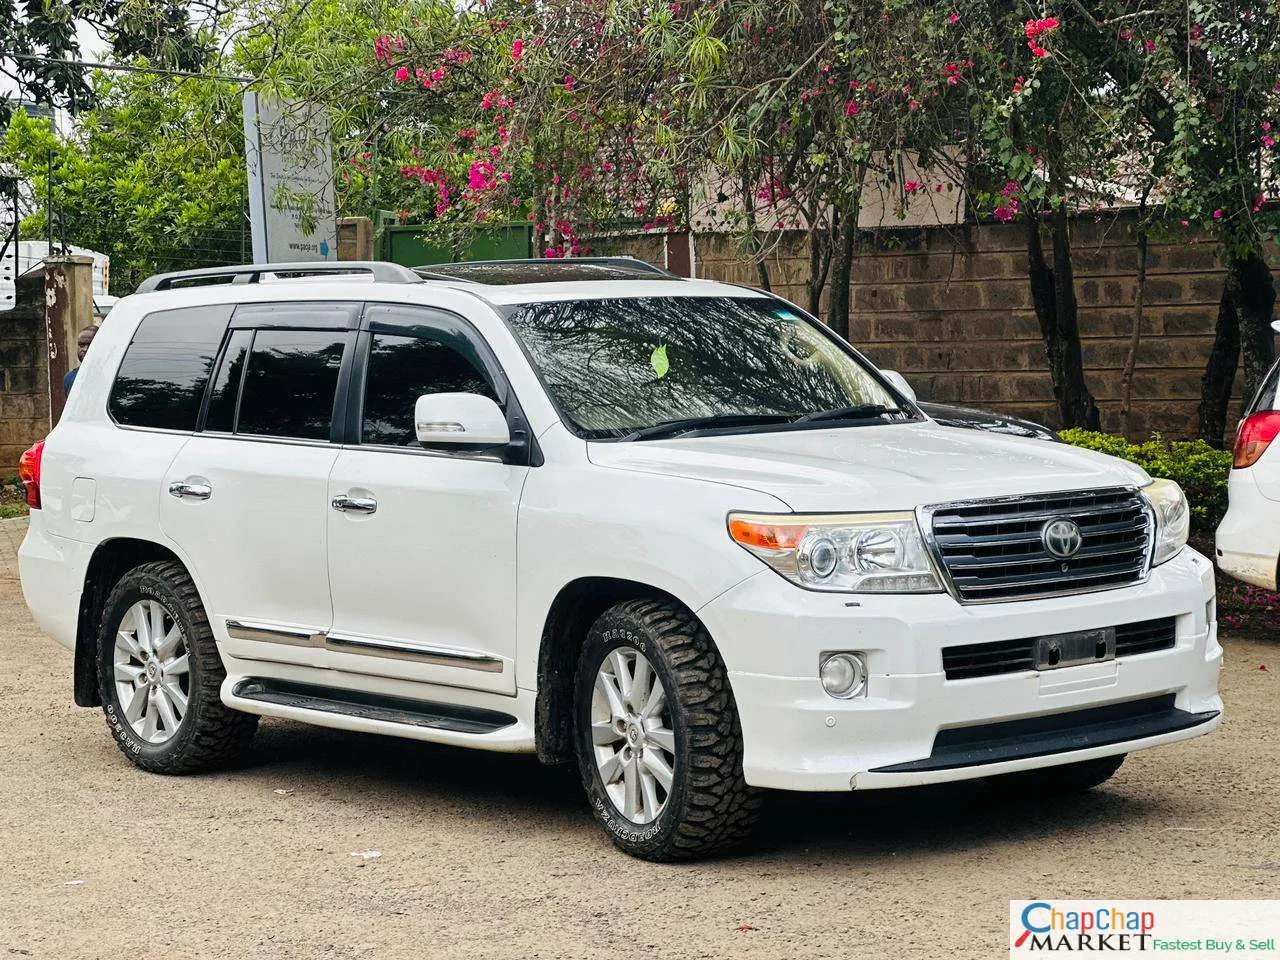 Toyota V8 ZX Kenya QUICK SALE SUNROOF LEATHER 2010 4M ONLY You Pay 40% Deposit Trade in OK EXCLUSIVE Toyota v8 for sale in kenya hire purchase installments landcruiser land cruiser